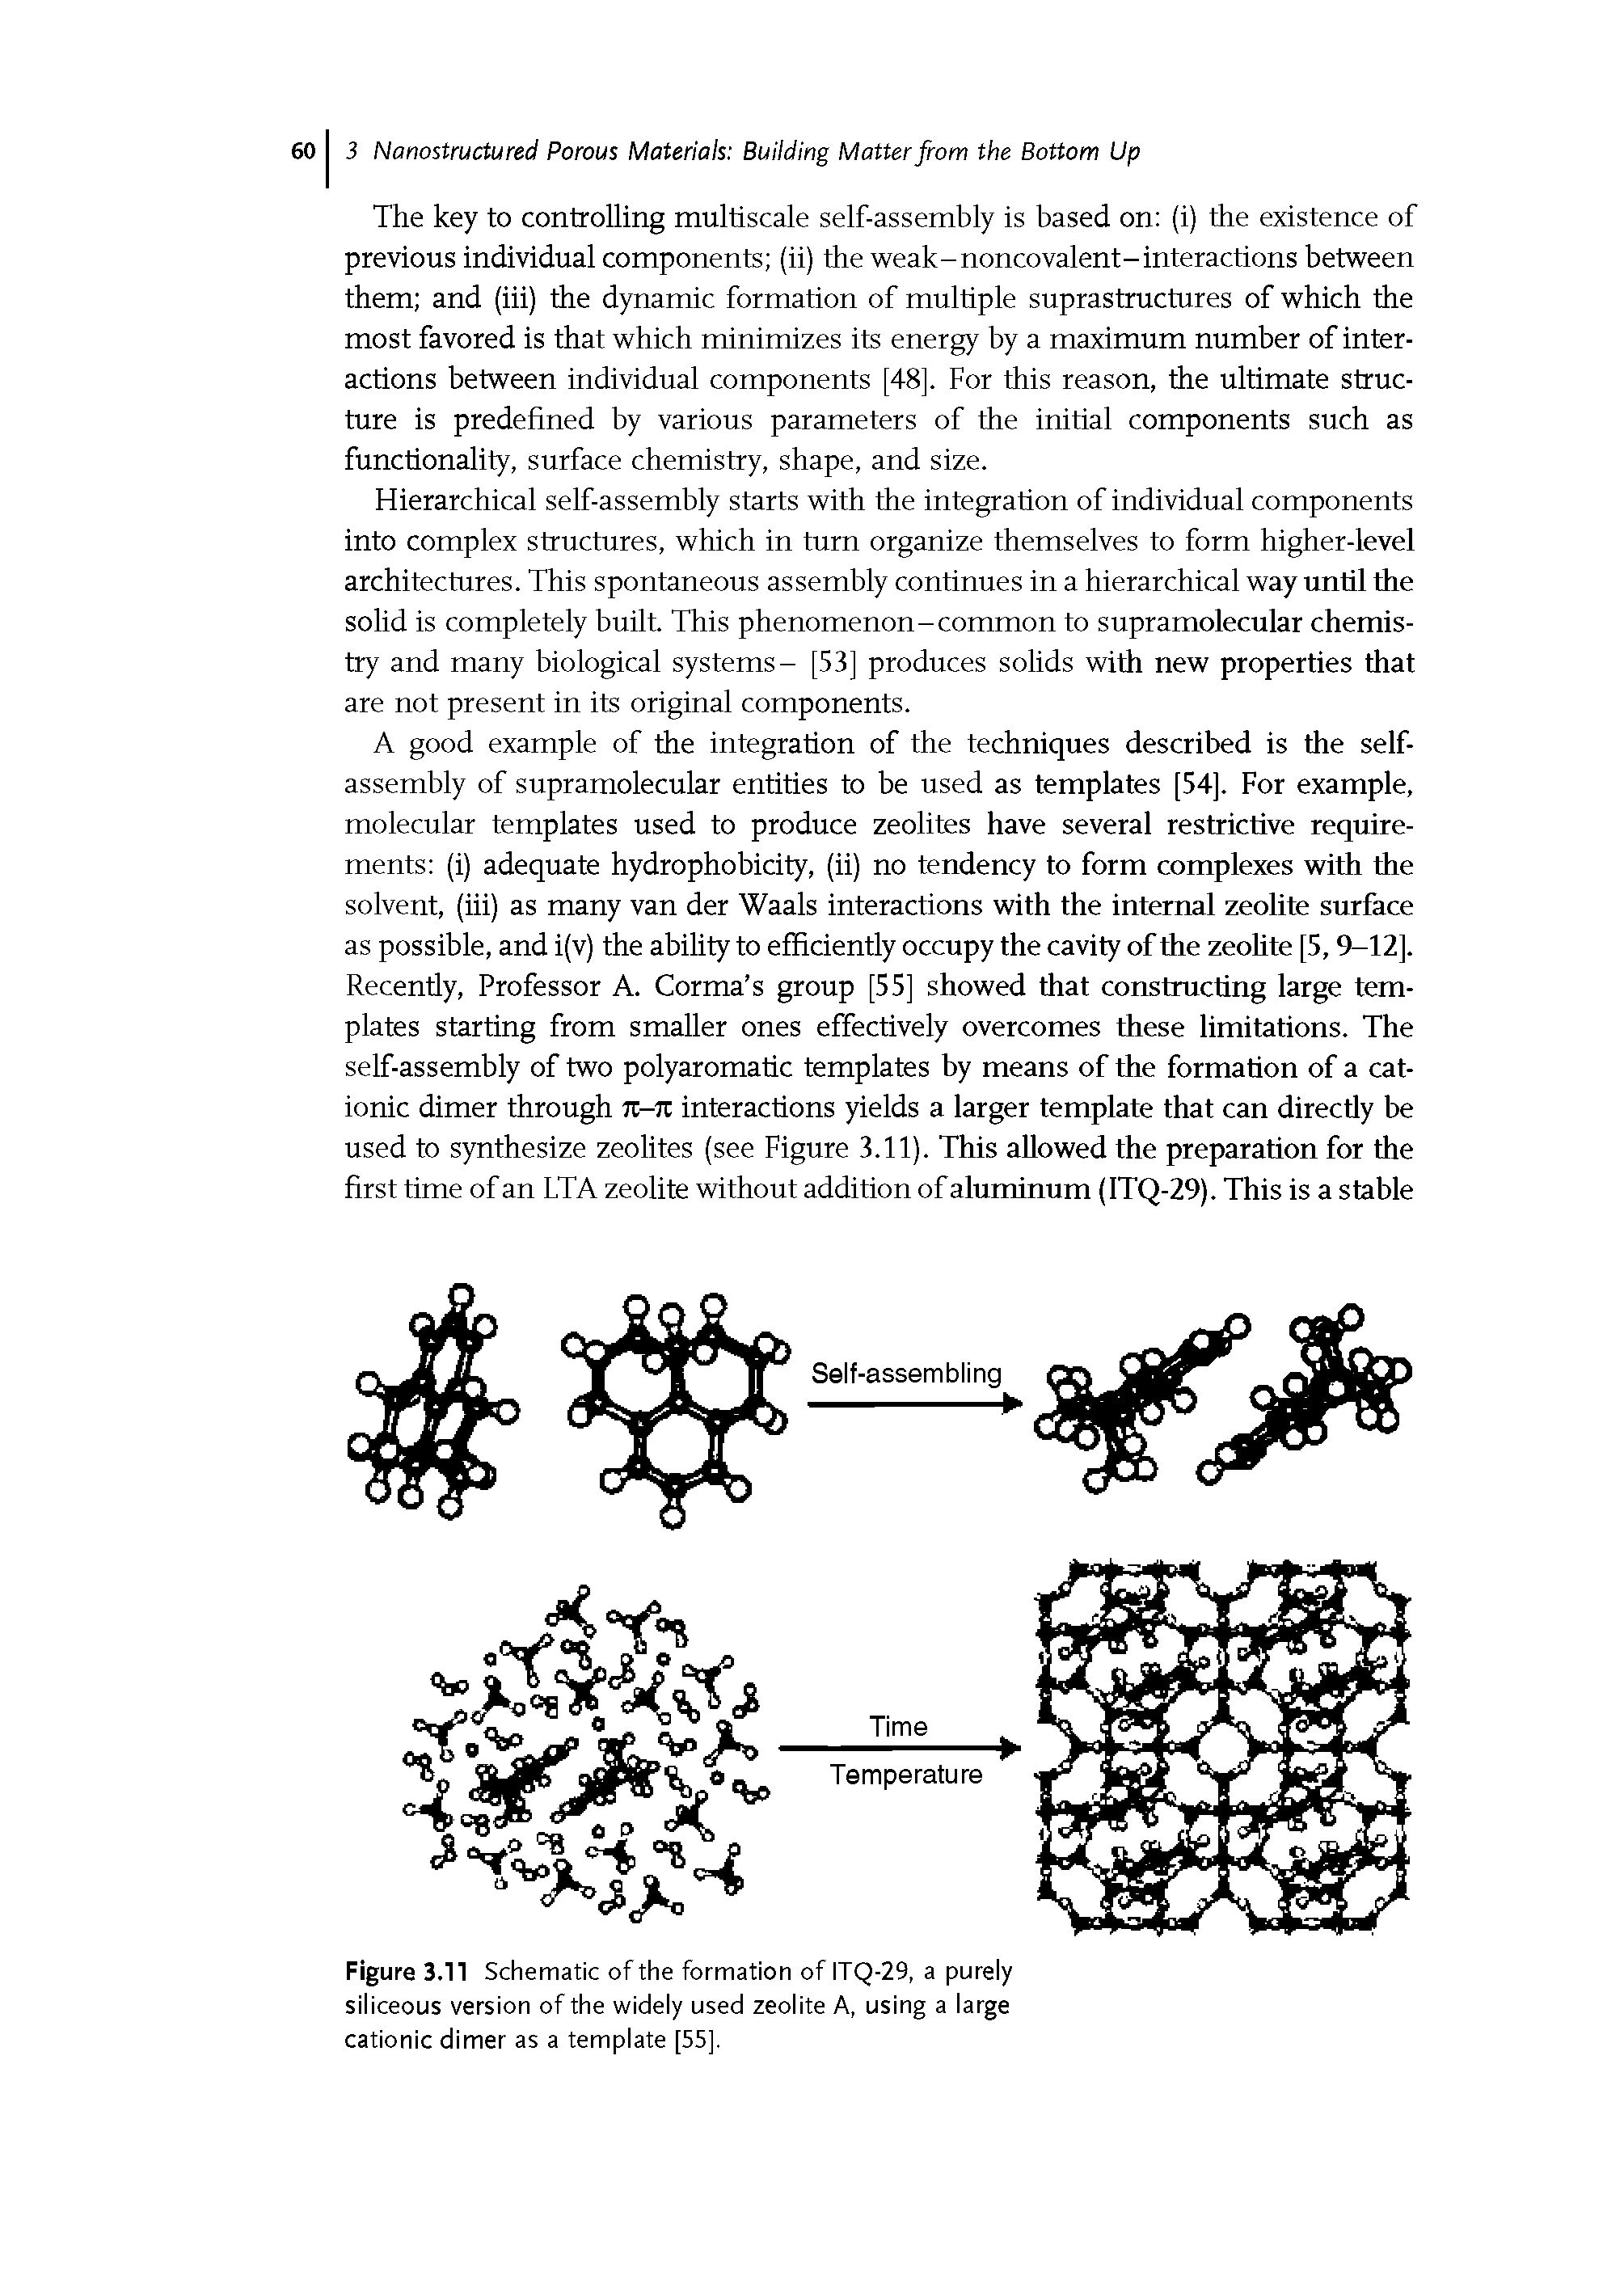 Figure 3.11 Schematic of the formation of ITQ-29, a purely siliceous version of the widely used zeolite A, using a large cationic dimer as a template [55],...